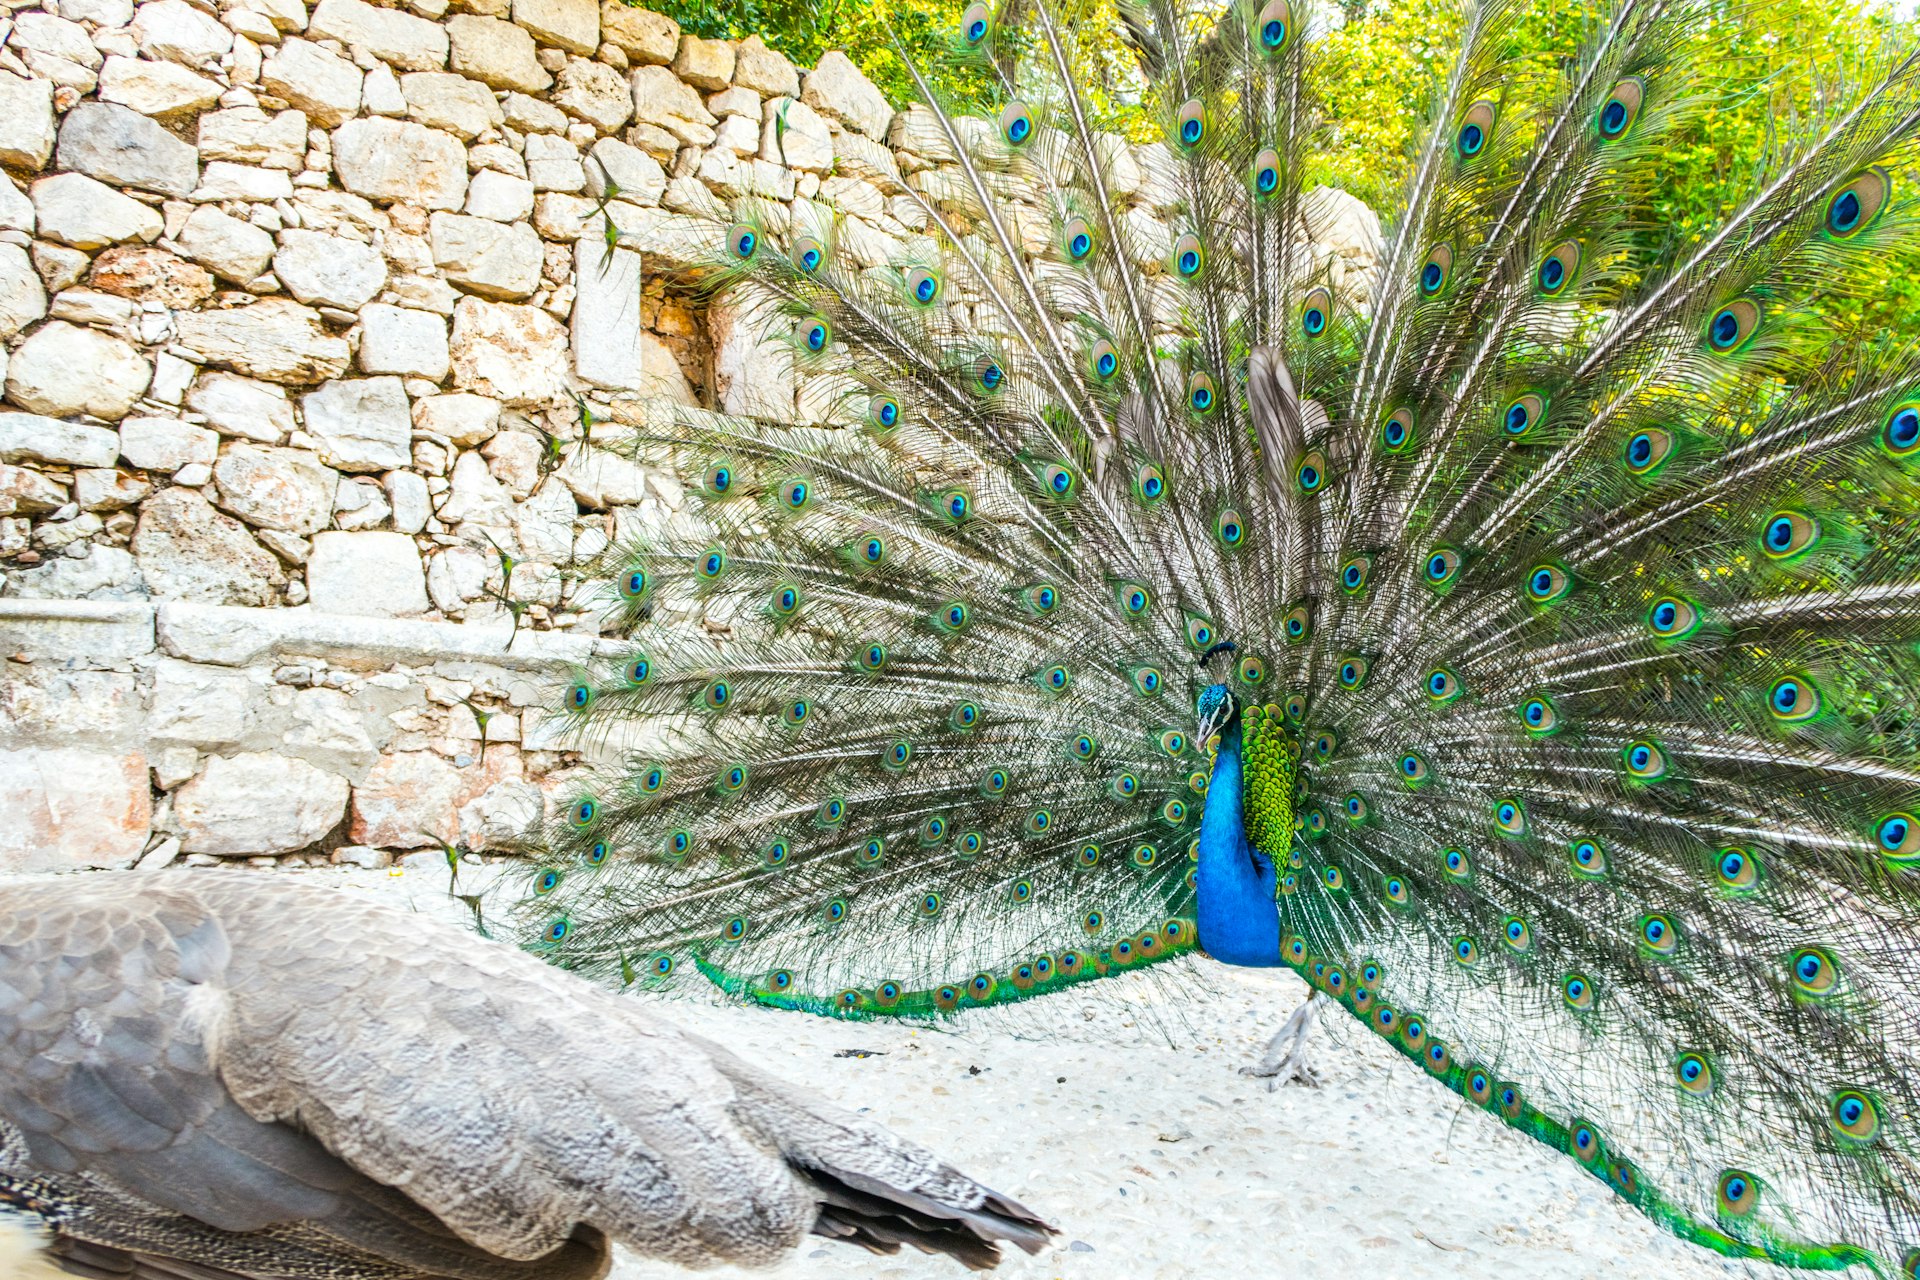 Adult male peacock displaying colorful and vibrant feathers with vivid blue body and green and yellow neon colored fanned out tail as a female hen walks by on the island of Lokrum in Croatia